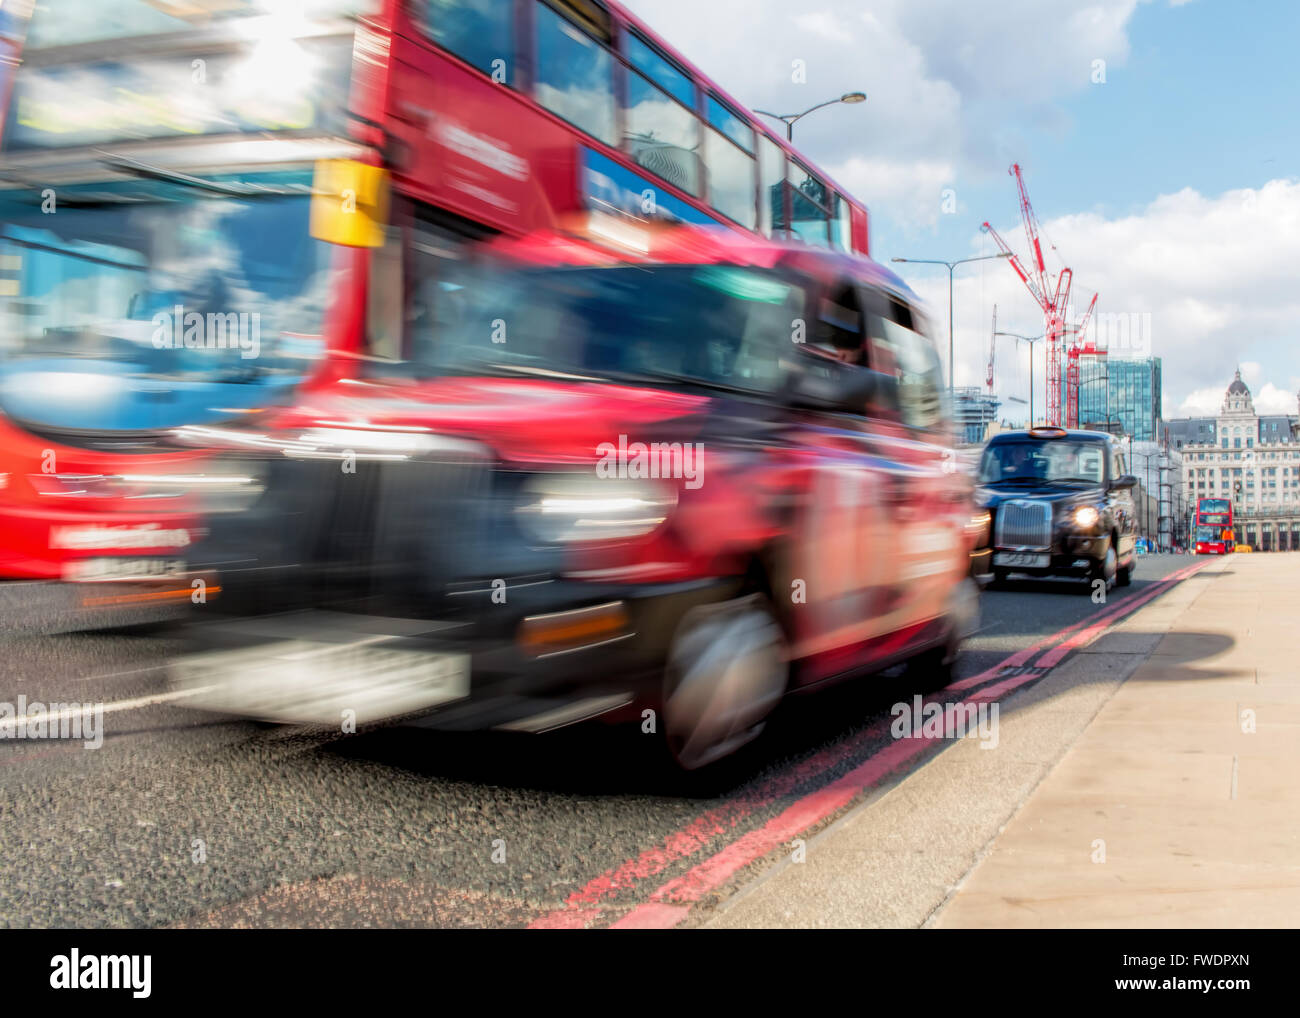 London Transport Concept. Red Bus And Taxi Cab Motion Blur Stock Photo